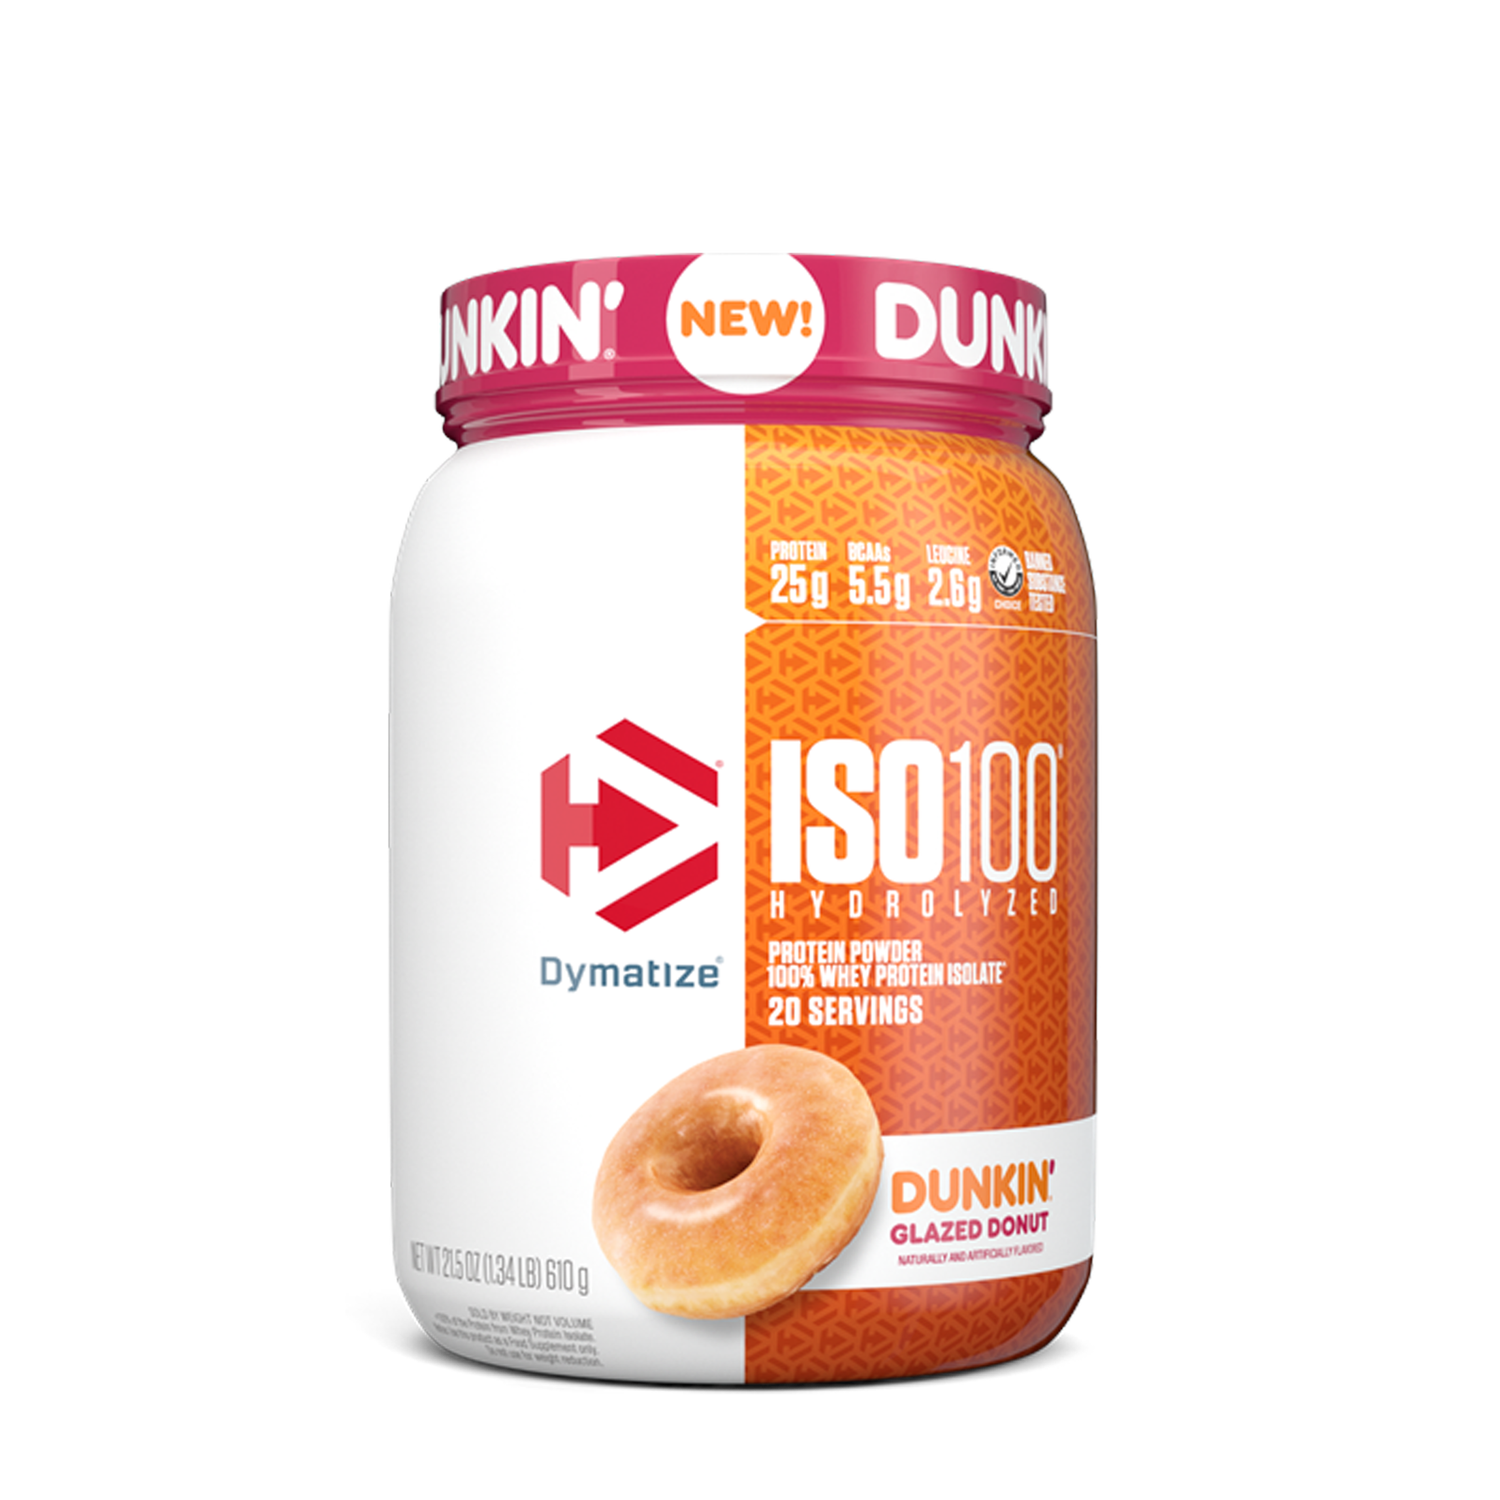 Dymatize Iso 100 Whey Protein Isolate - Dunkin Glazed Donut (20 Servings) - 1.3 lbs.